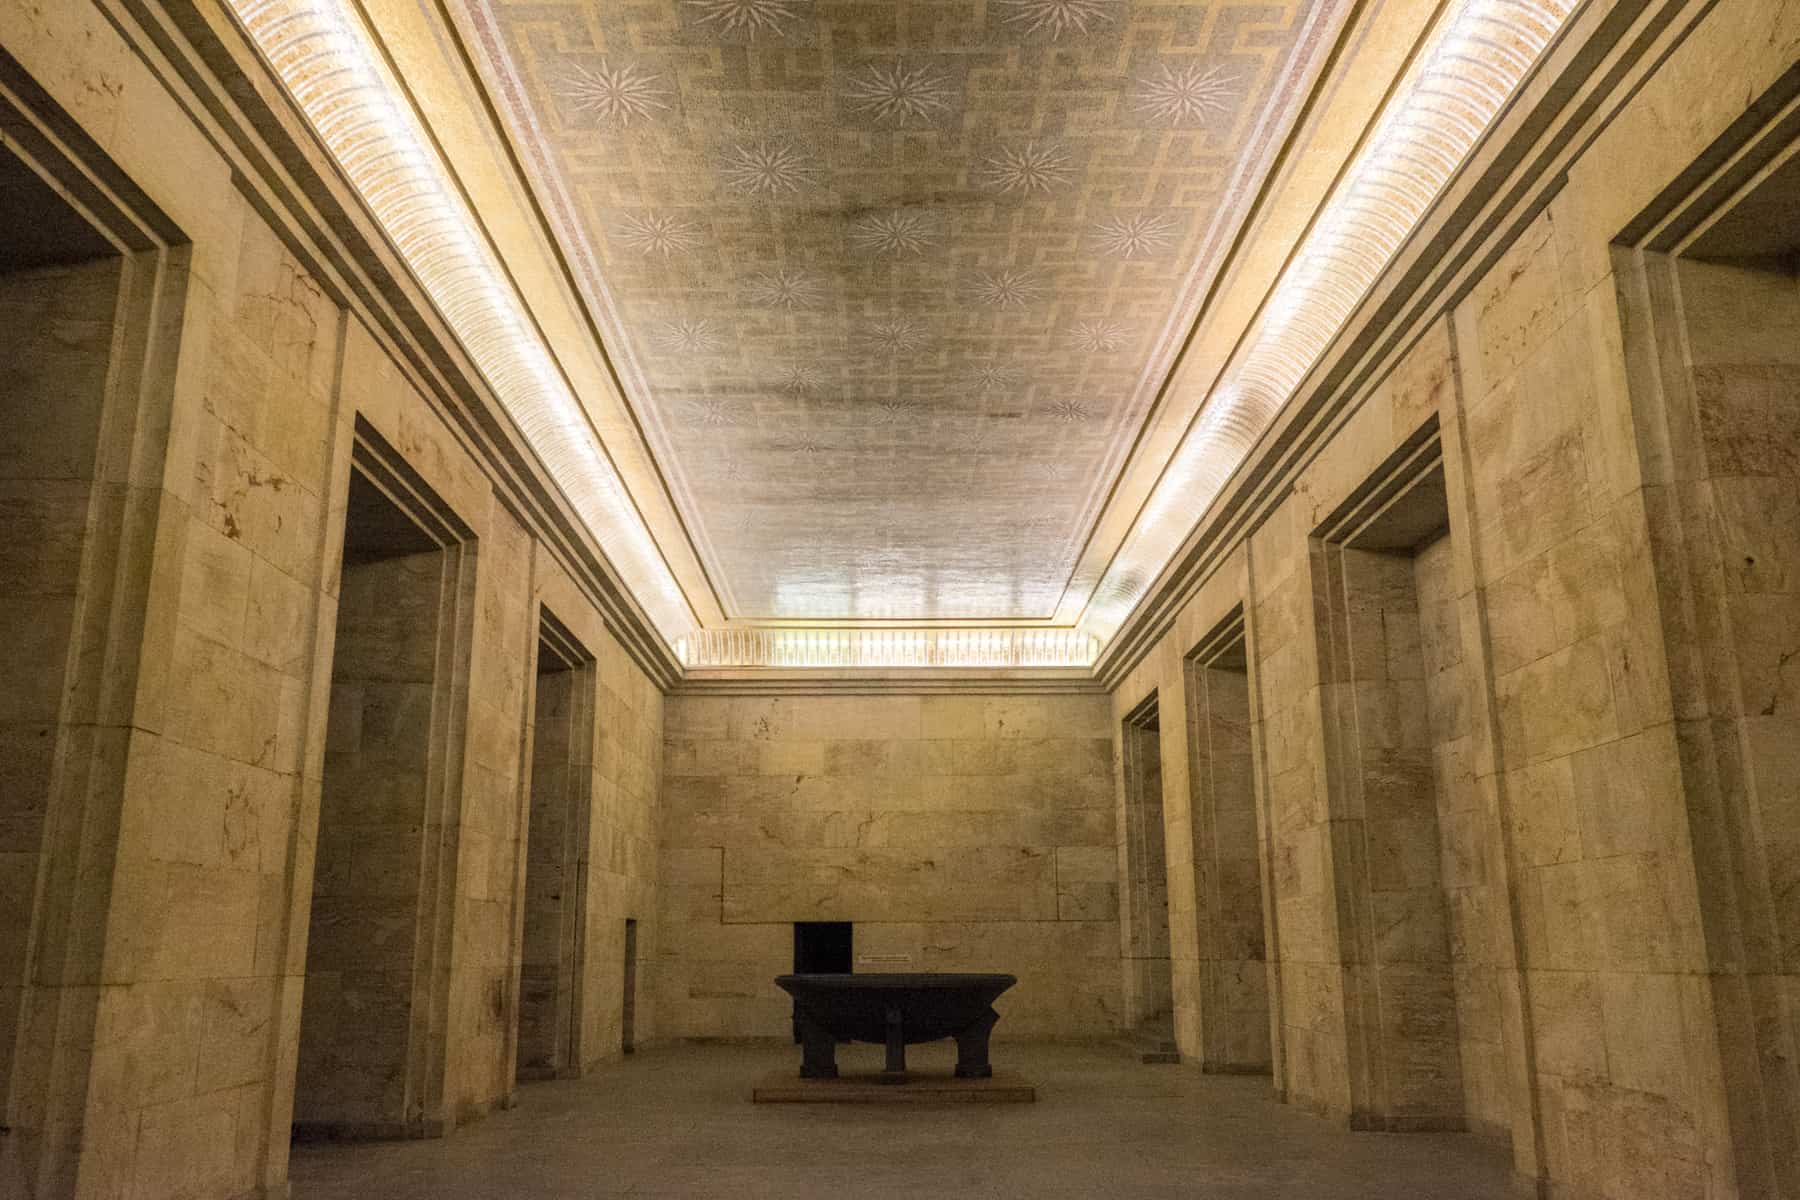 The former Nazi Party Rally Grounds site of the Golden Room with a swastika decorated ceiling and high arch walls, inside the former Zeppelin Field Tribune building